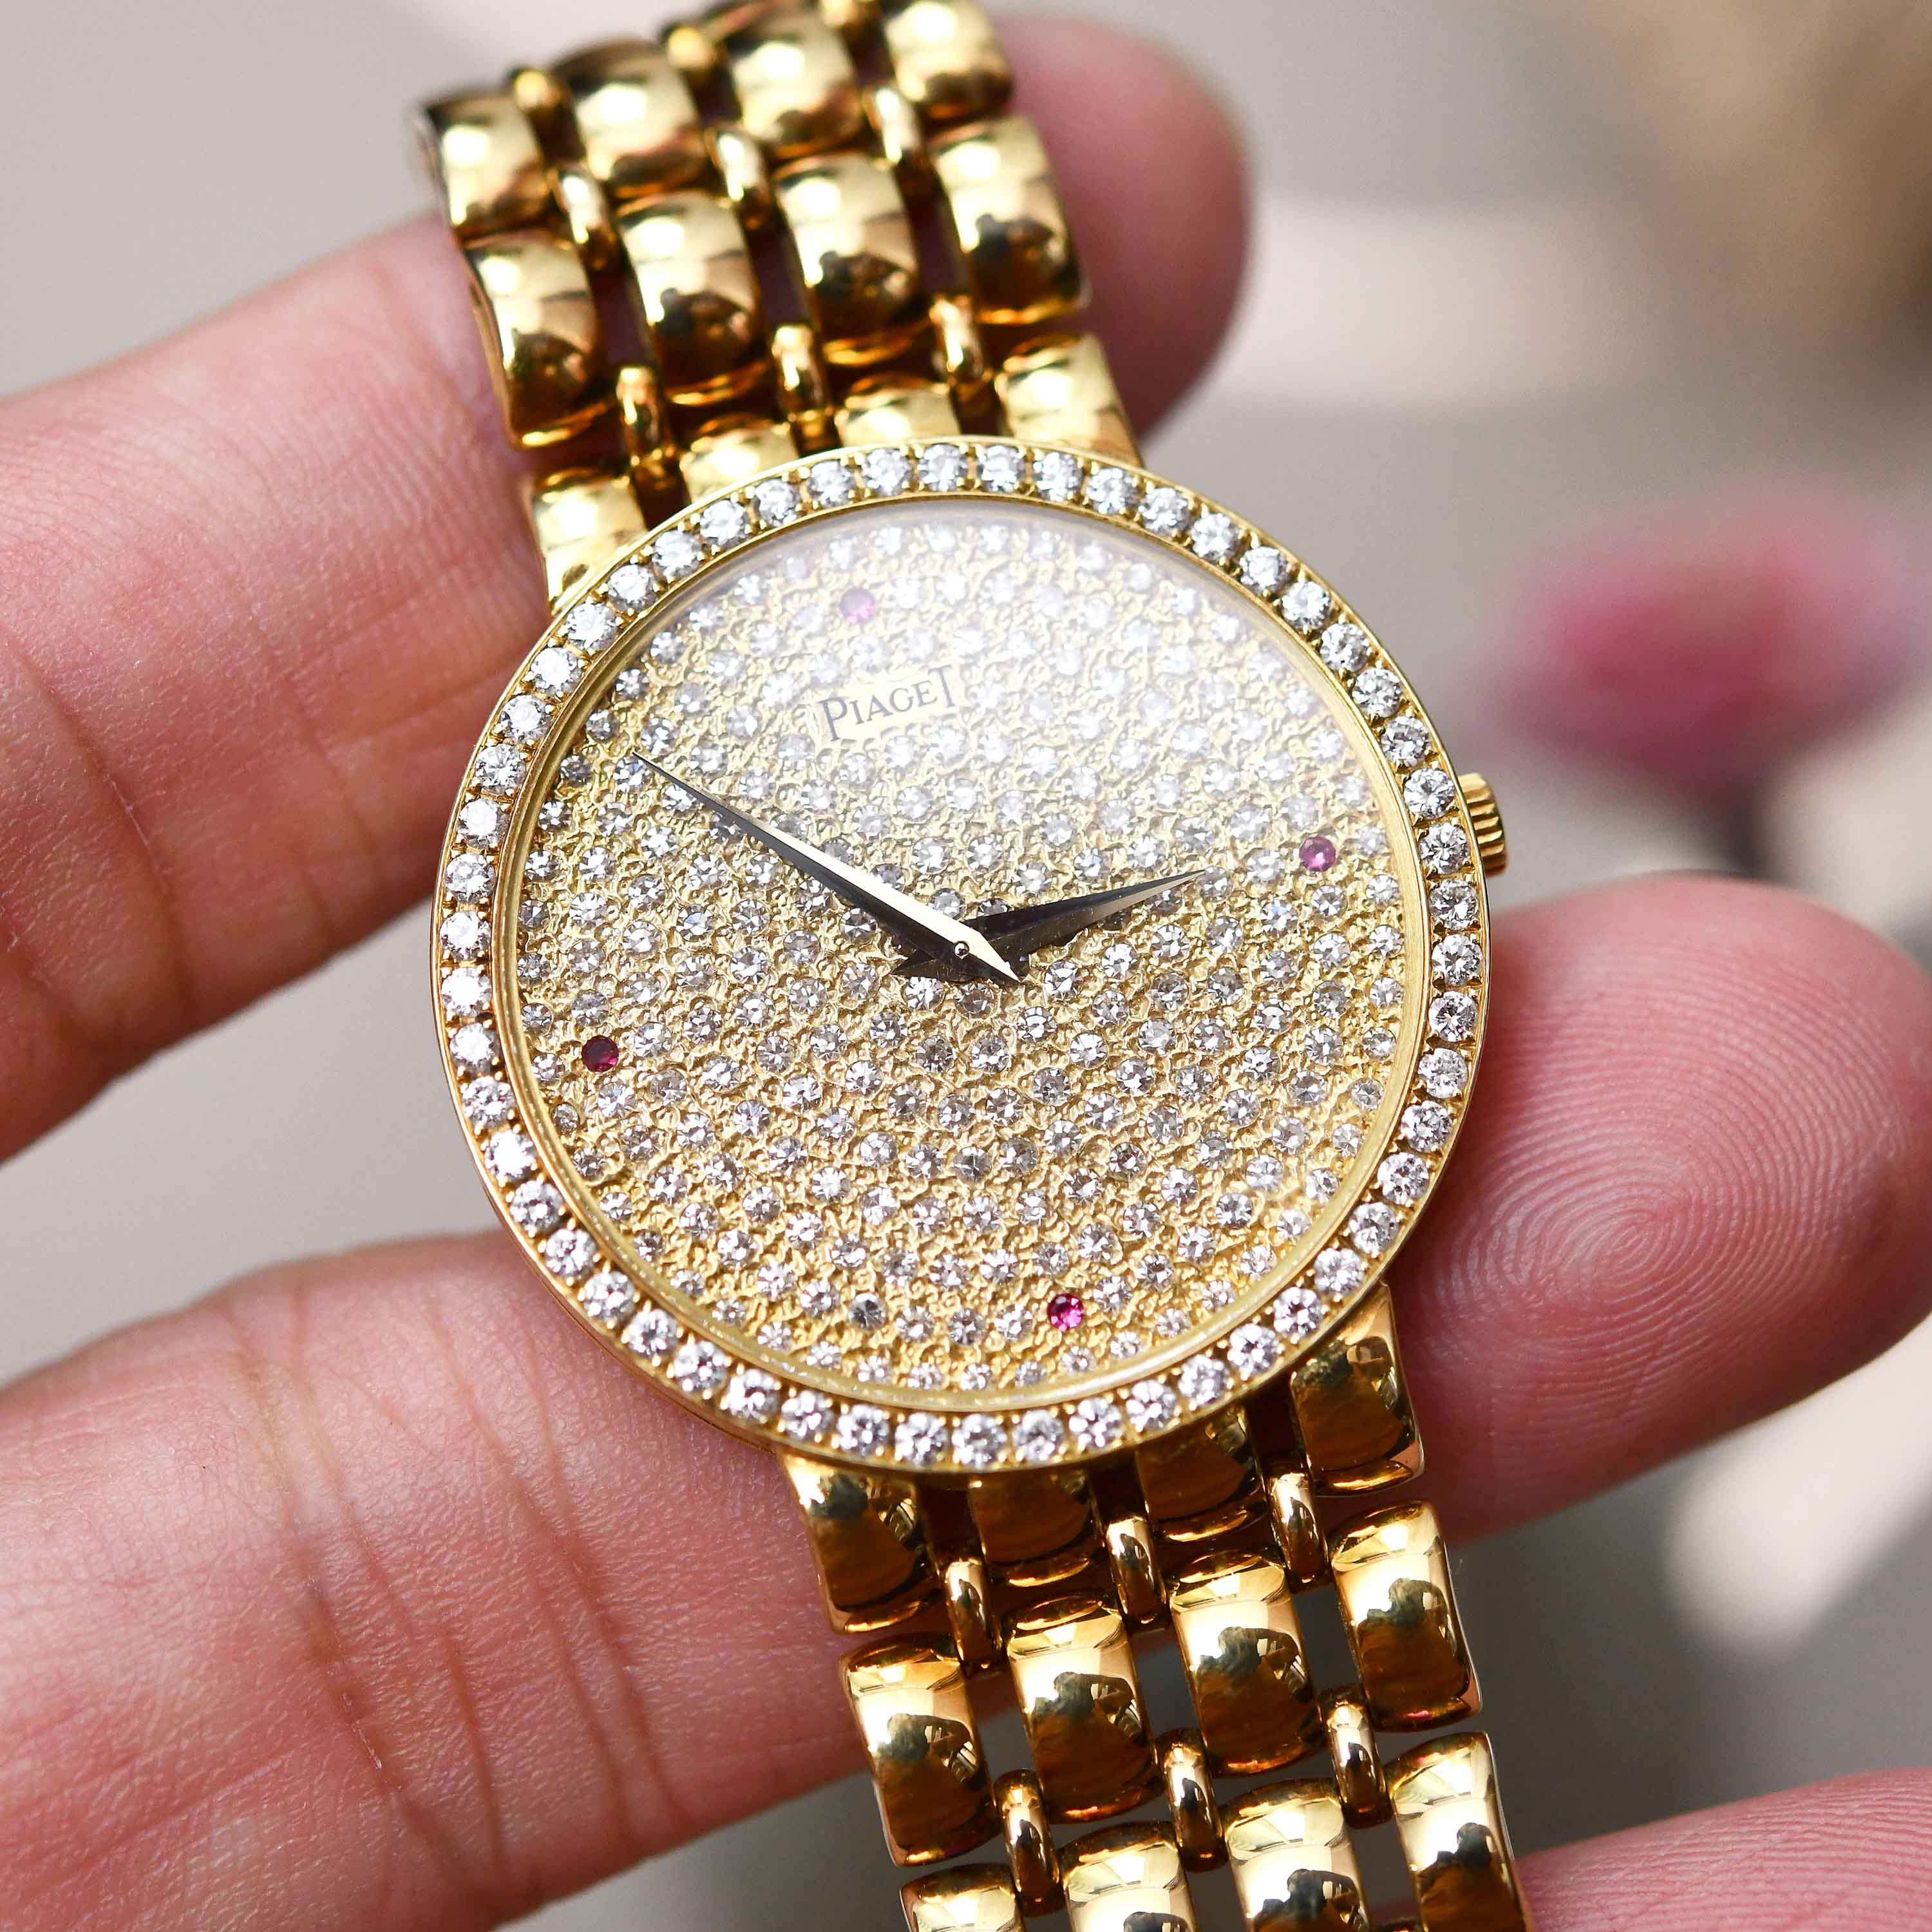 piaget-ref84075-pave-diamond-dial-ruby-indexes-yg-bracelet-img-main5